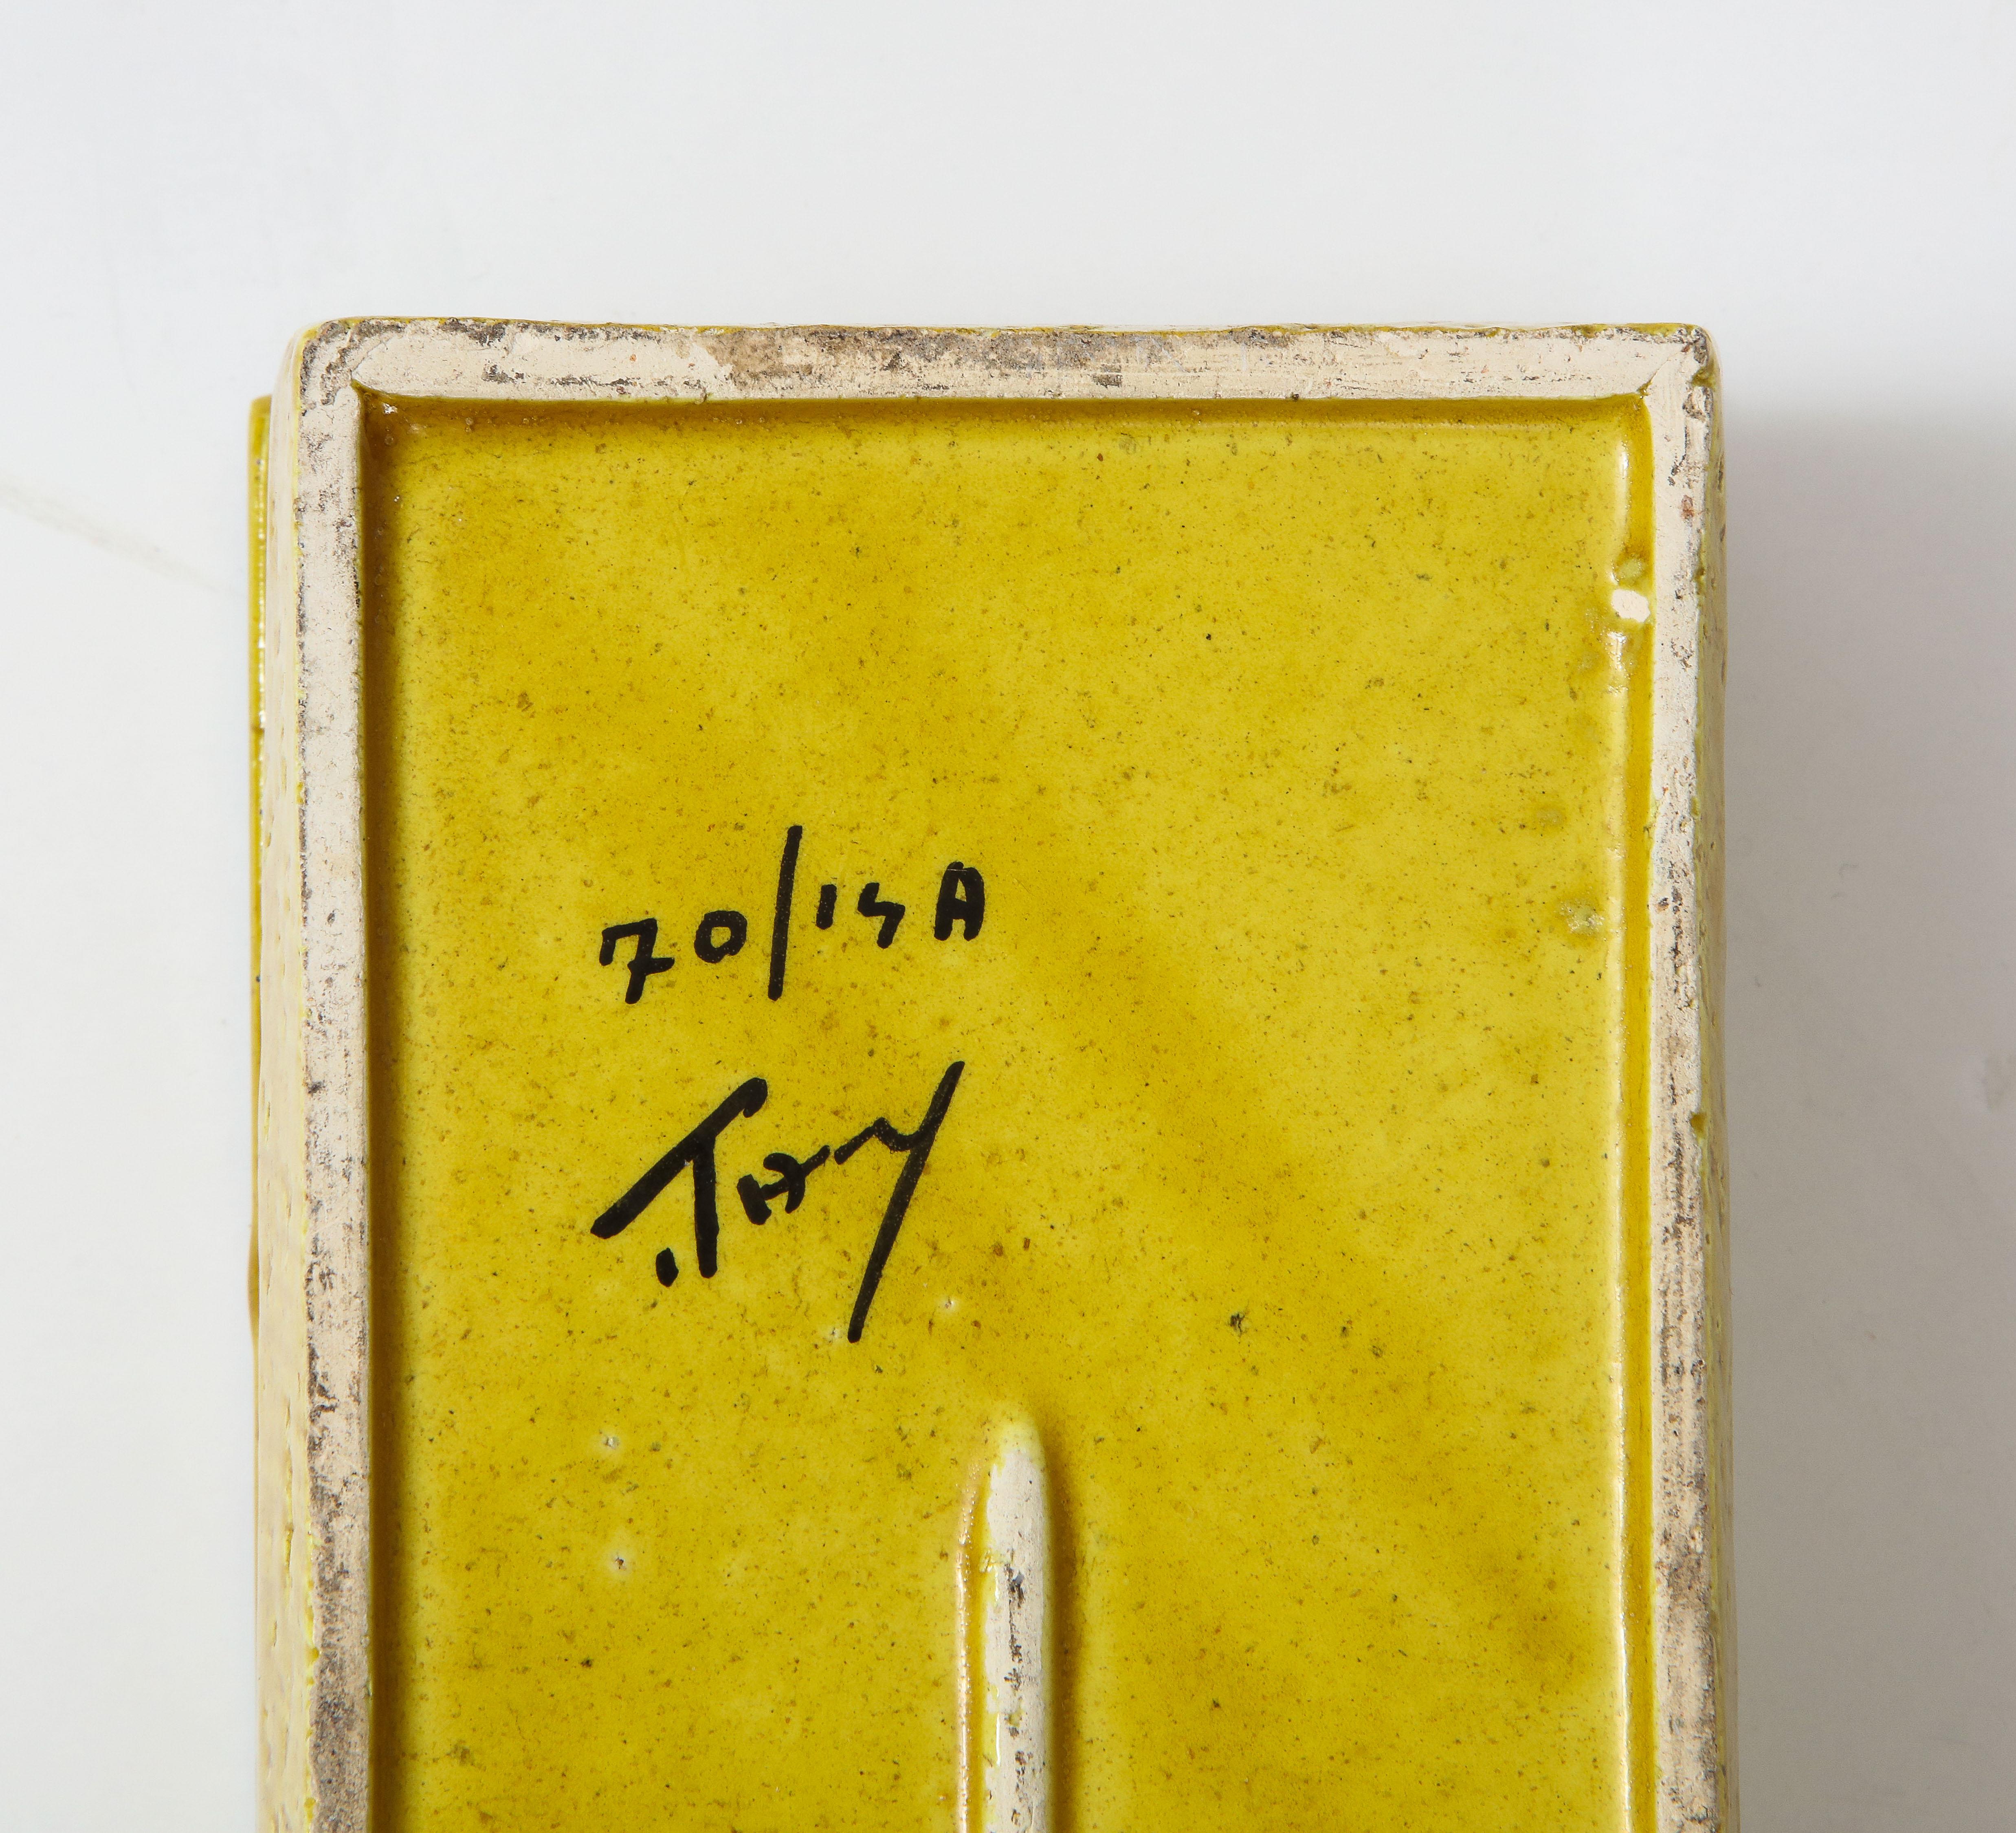 20th Century Bitossi Floral, Mustard Yellow Ceramic Box, Signed For Sale